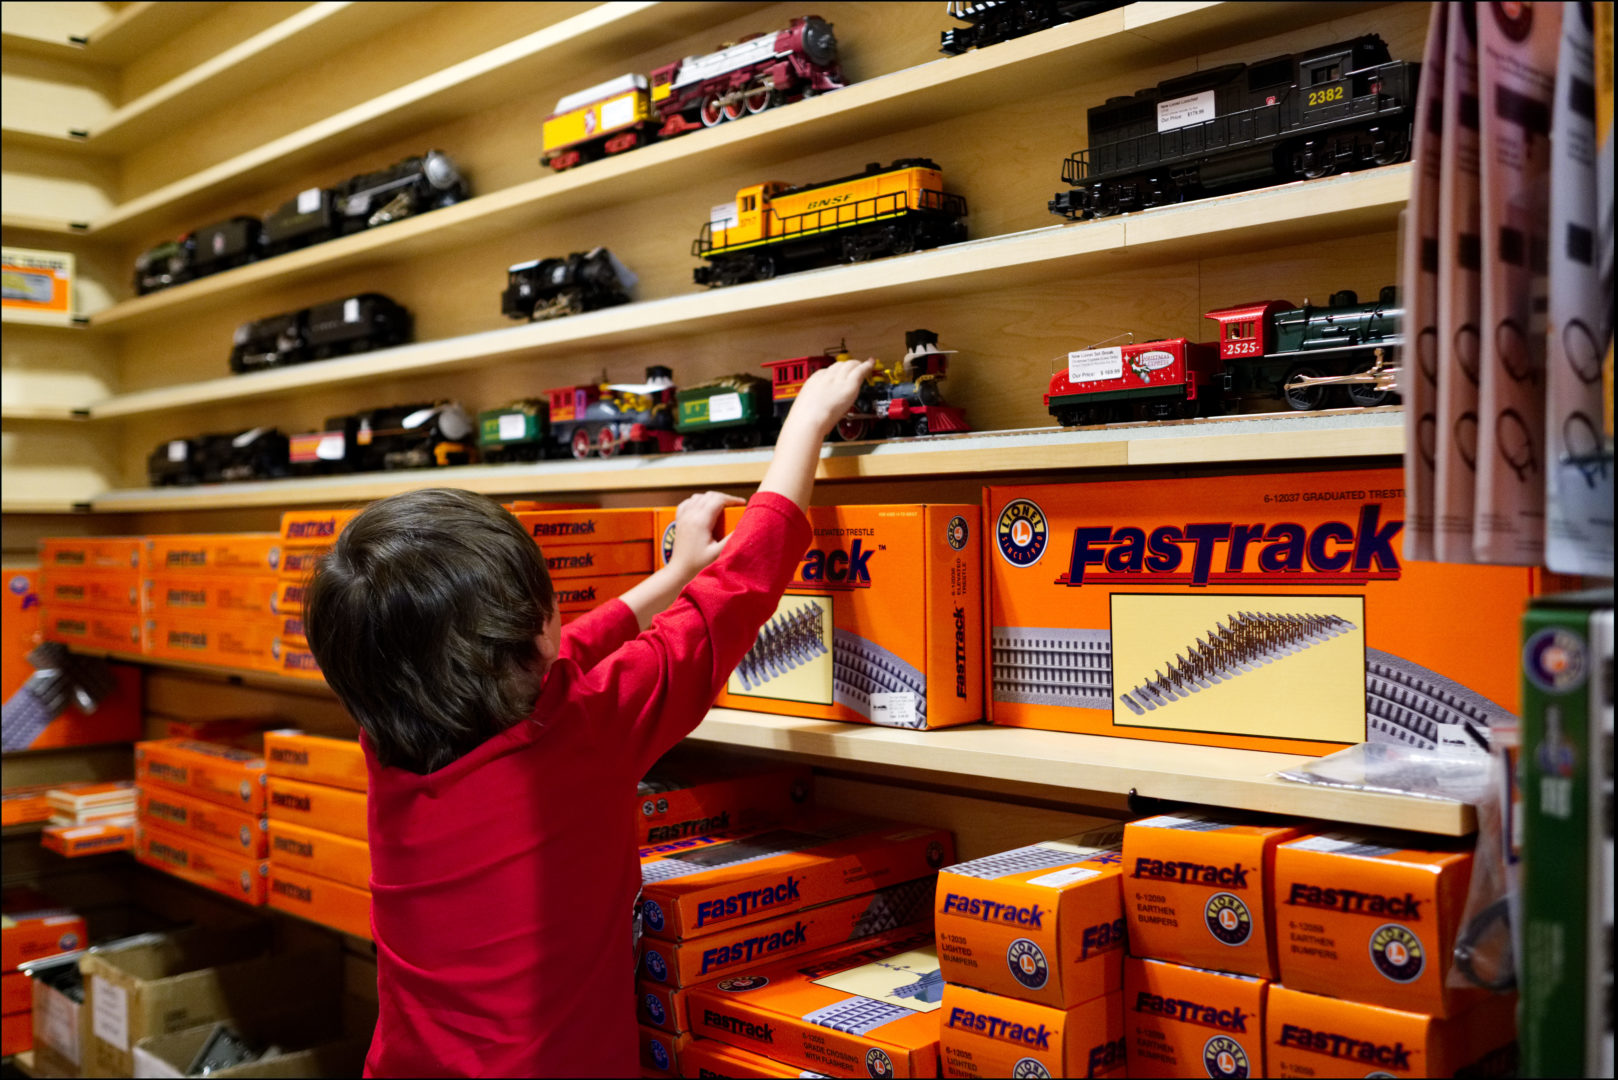 A boy chooses a model train from the display wall.